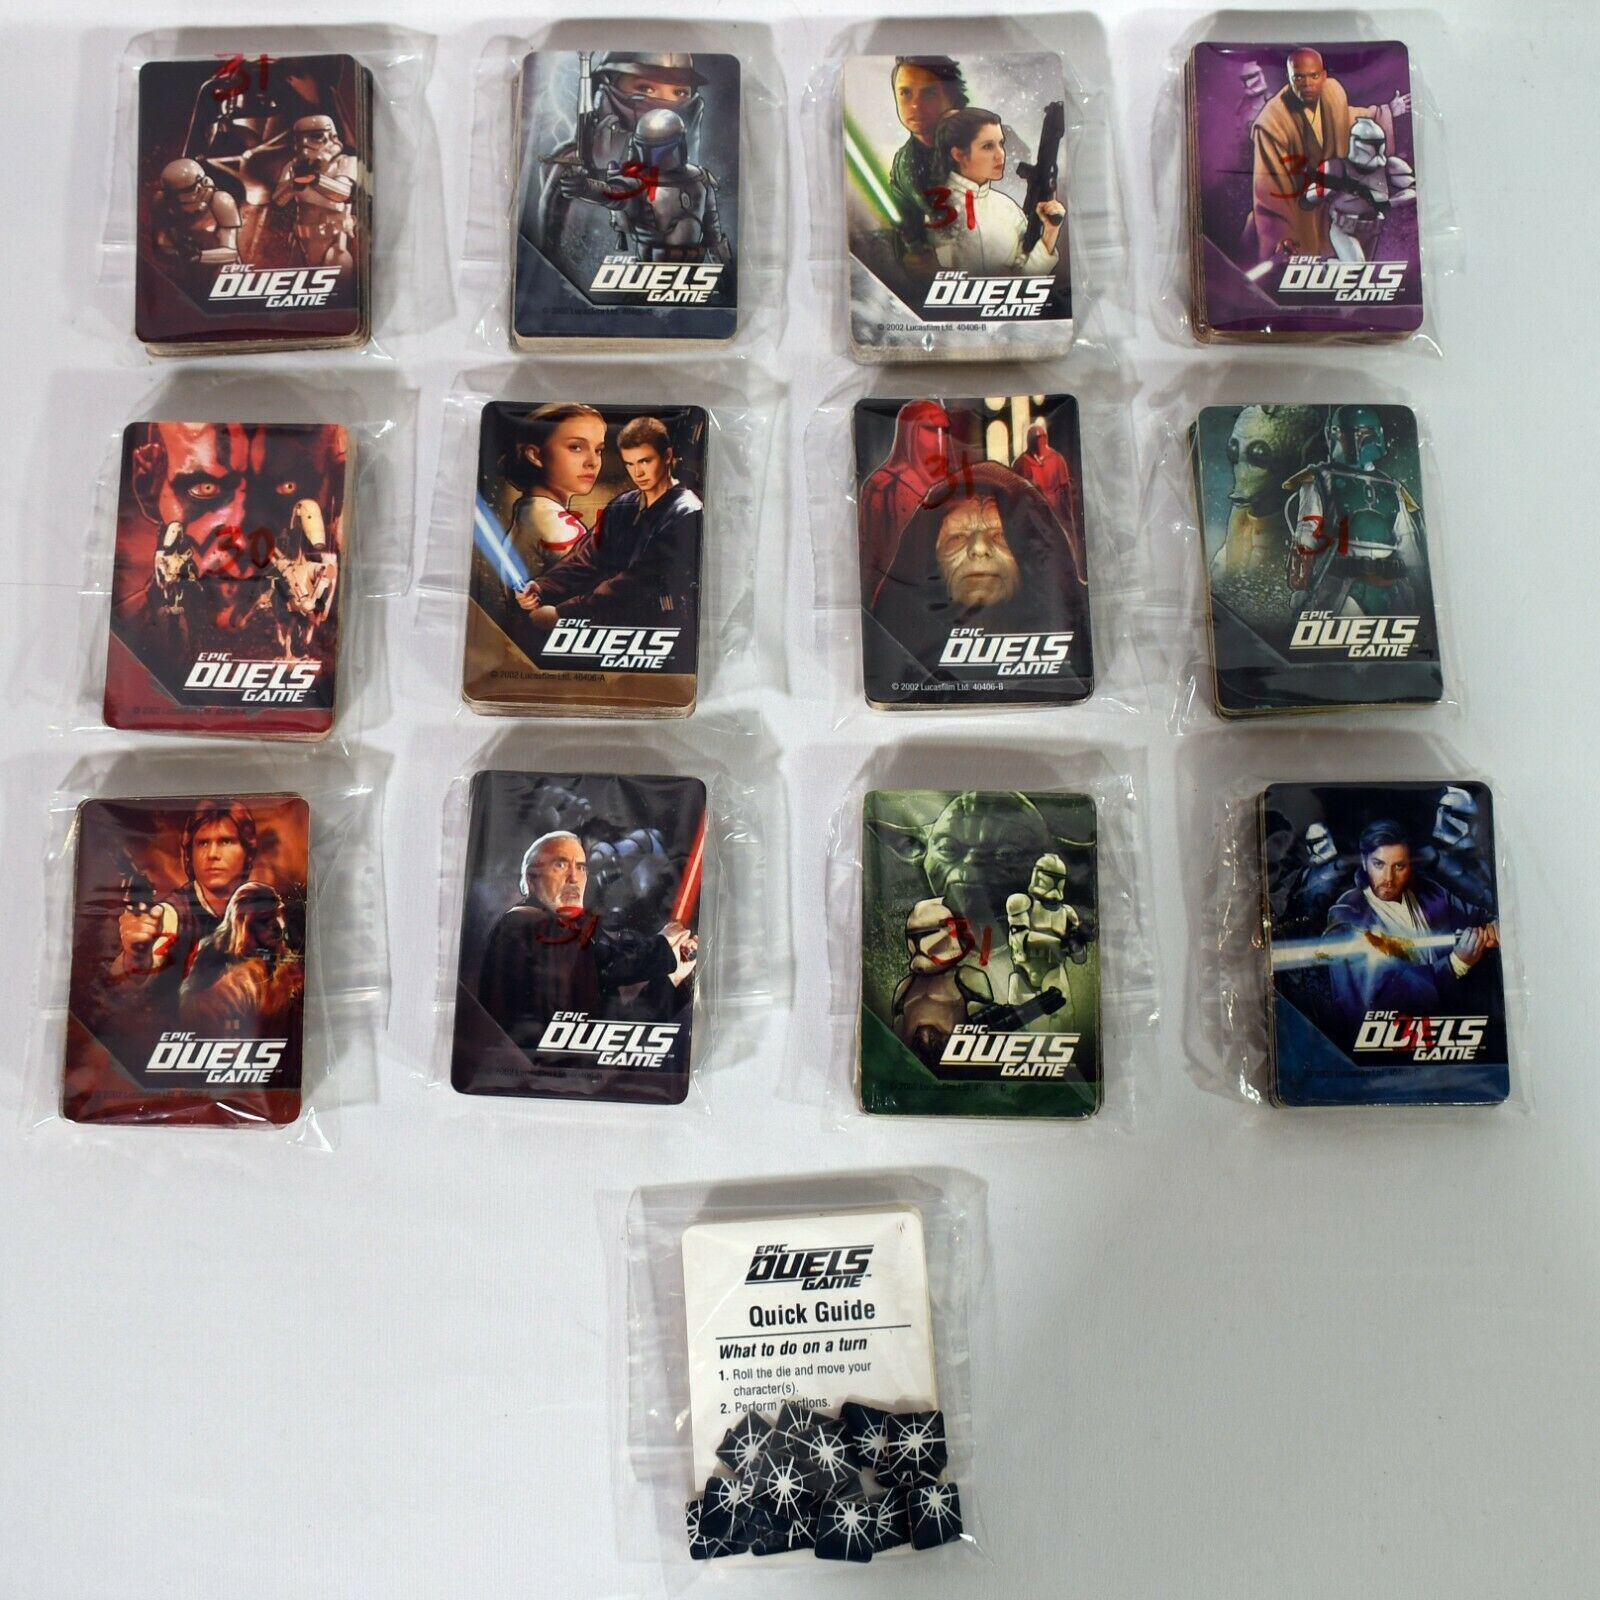 2002 Star Wars Epic Duels Replacement Character Card Bundles You Pick 0222!!! - $12.38 - $14.85